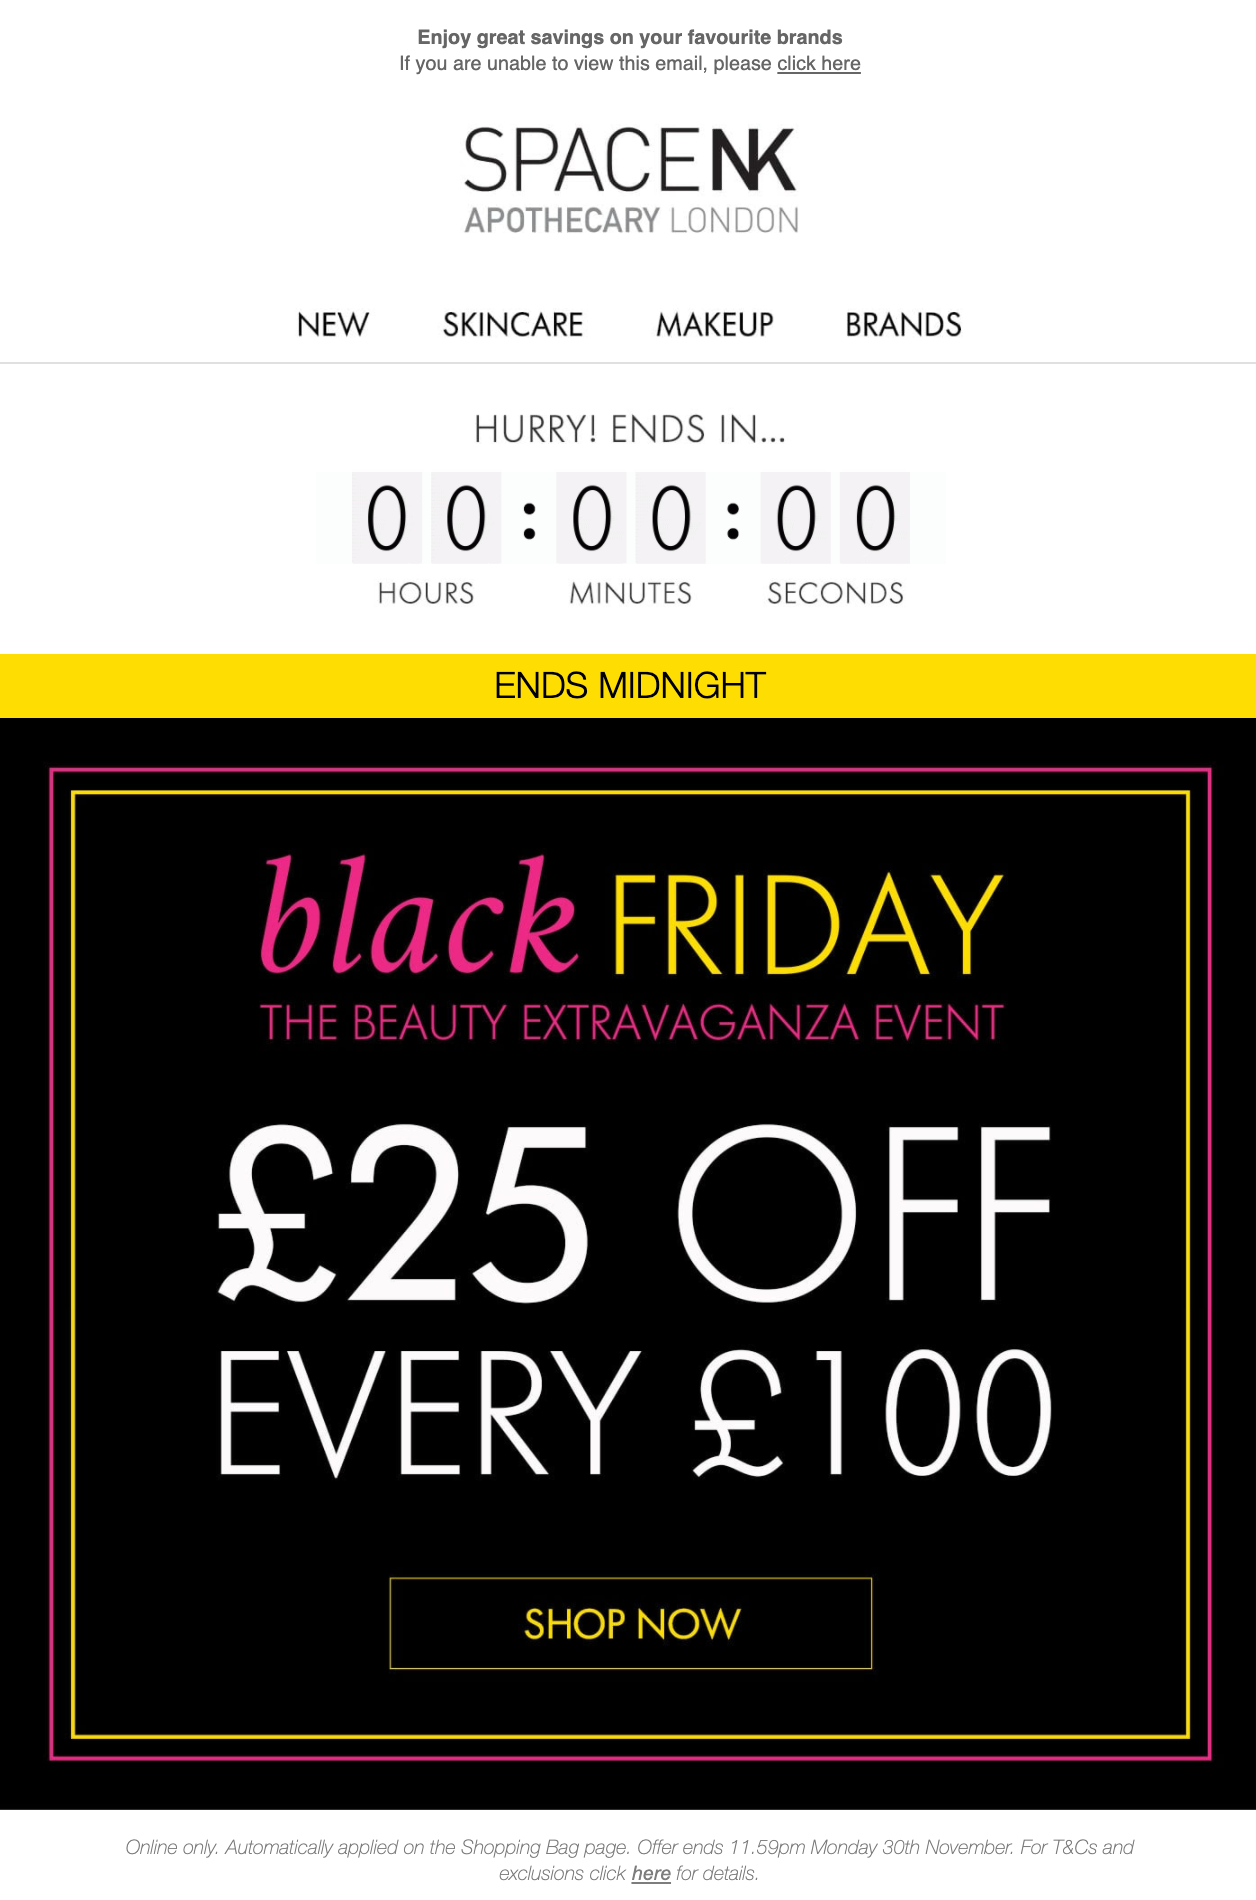 SpaceNK Black Friday email example with big headline and countdown timer